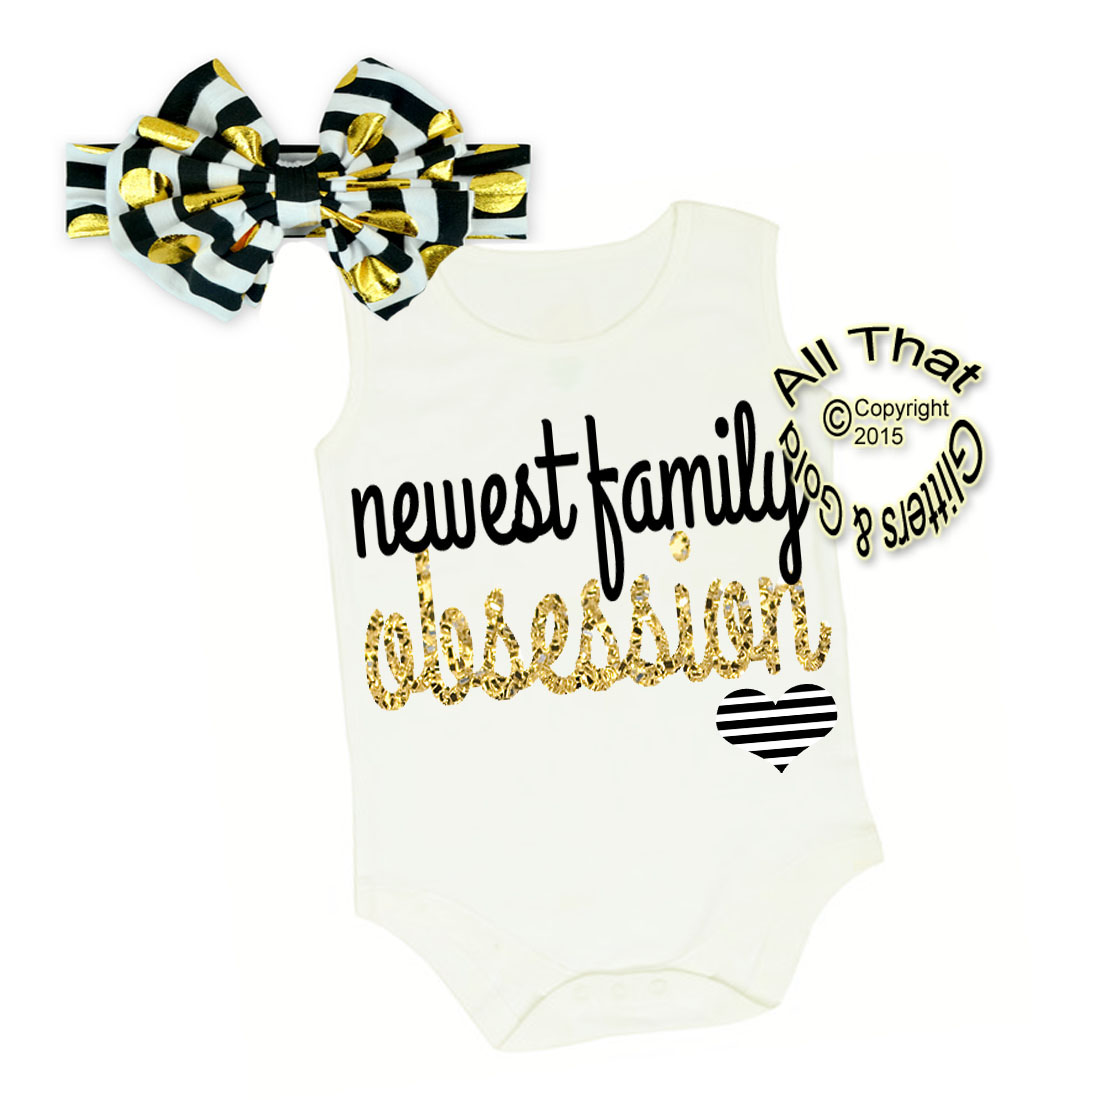 Black, White and Gold Glitter Newest Family Obsession Shirt or Outfit